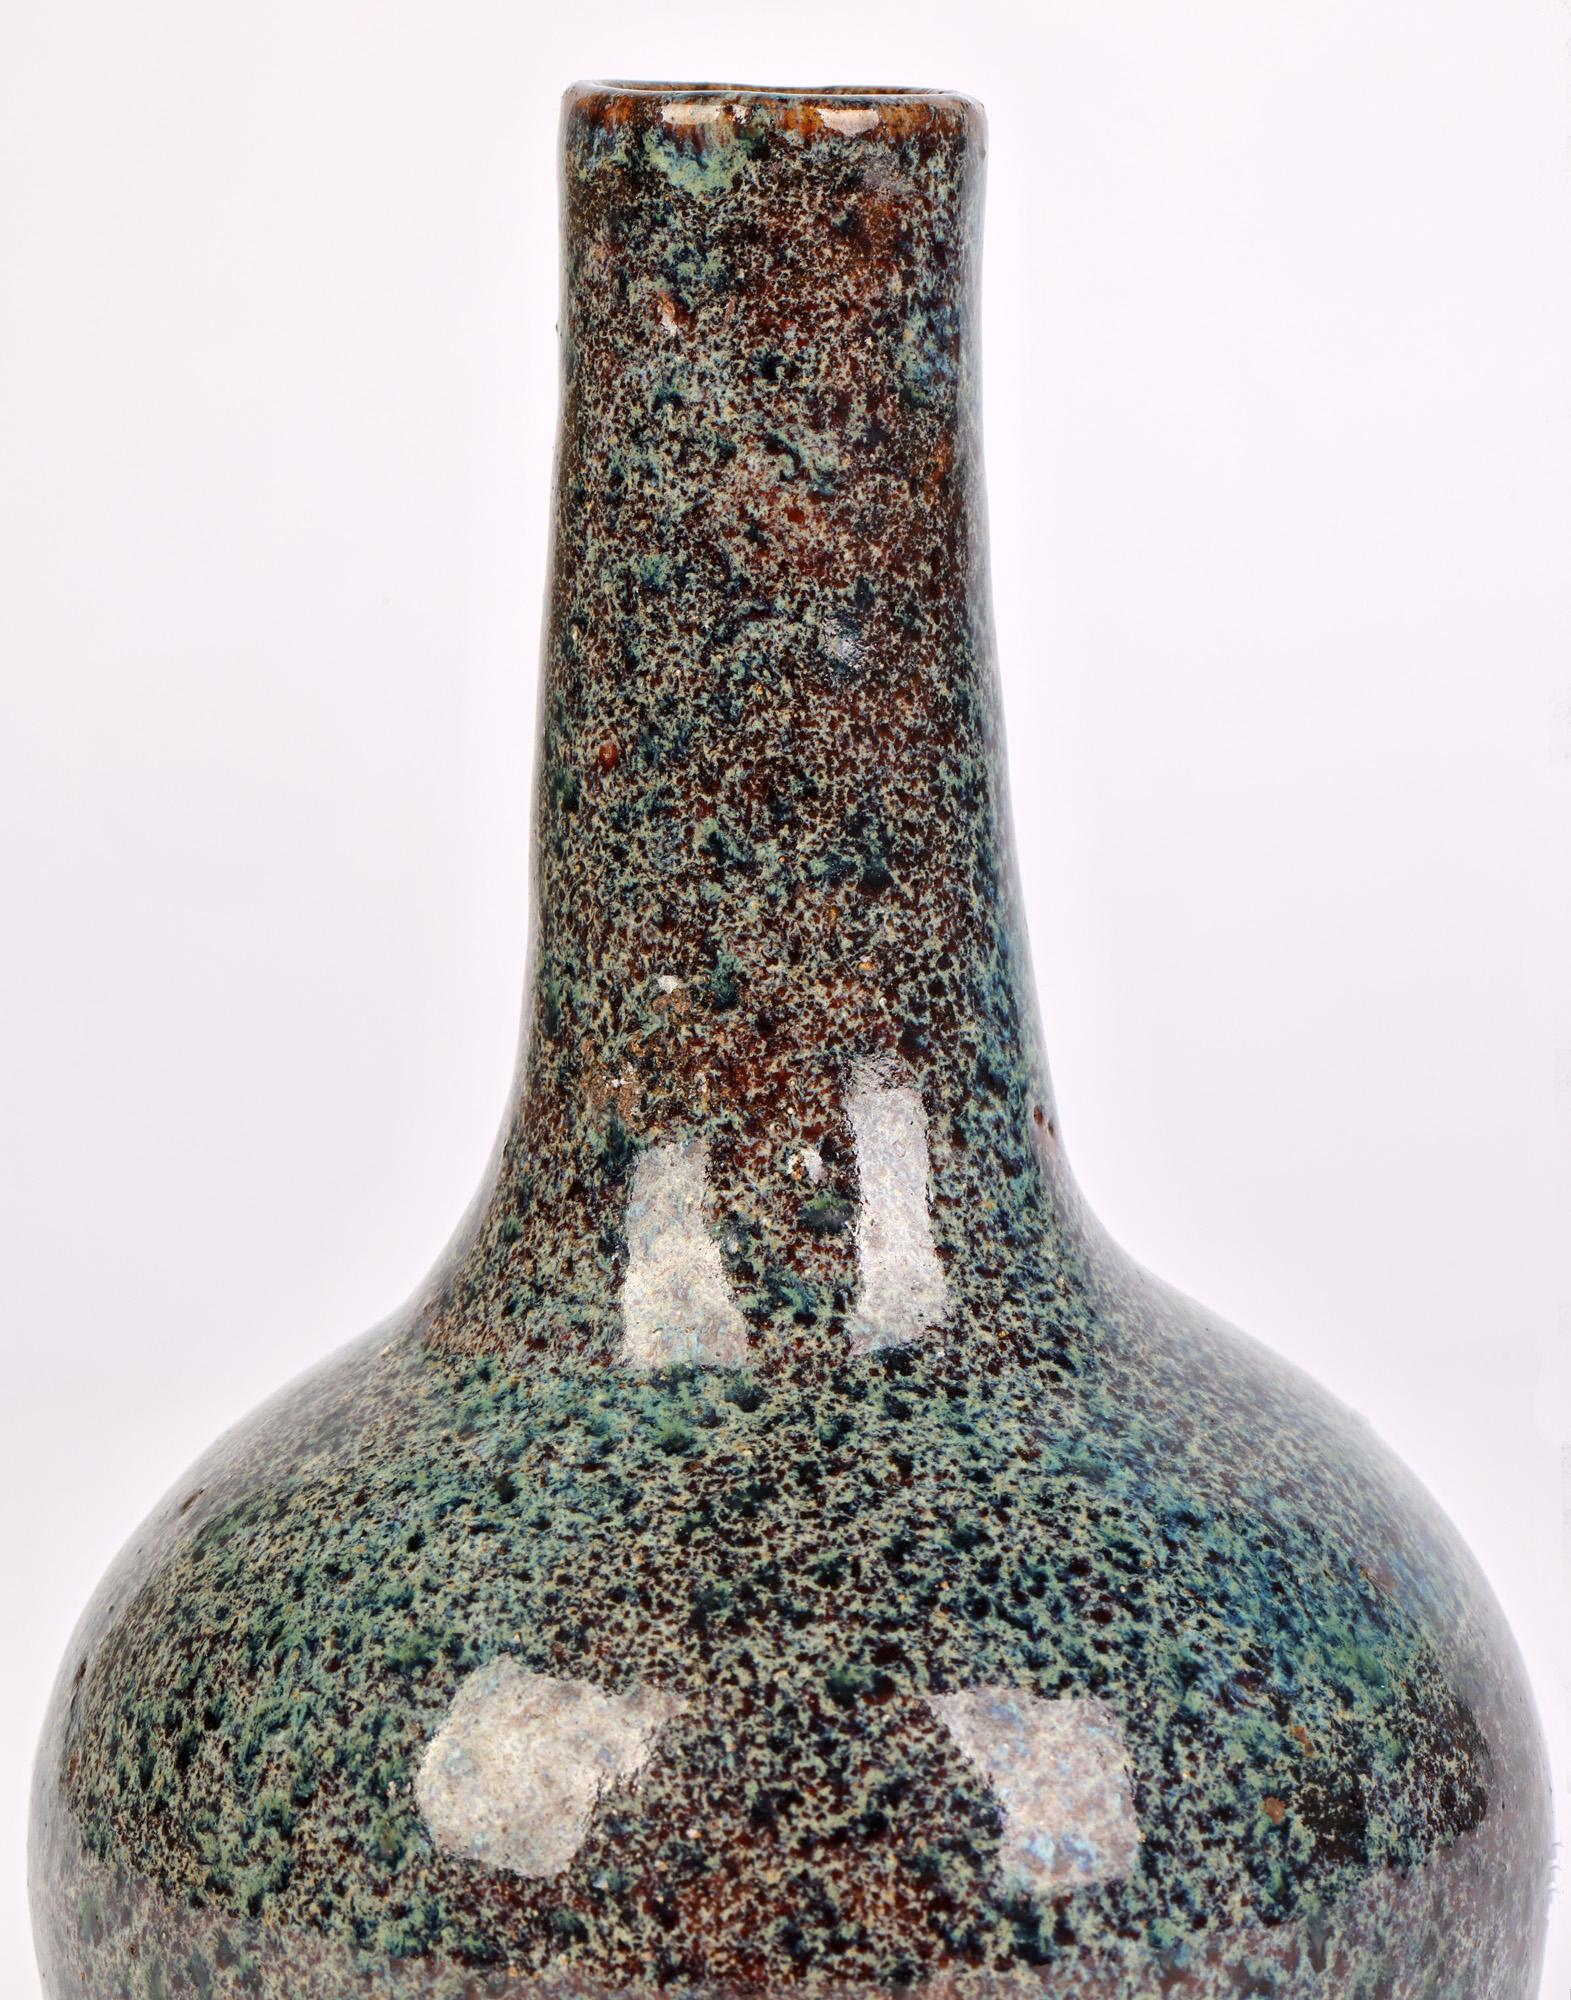 A fine quality Chinese onion shape bottle vase decorated in mottled glazes dating from the latter 19th or 20th century. The stoneware vase stands raised on a narrow round foot and has a round lower body with a tall slender neck with simple round